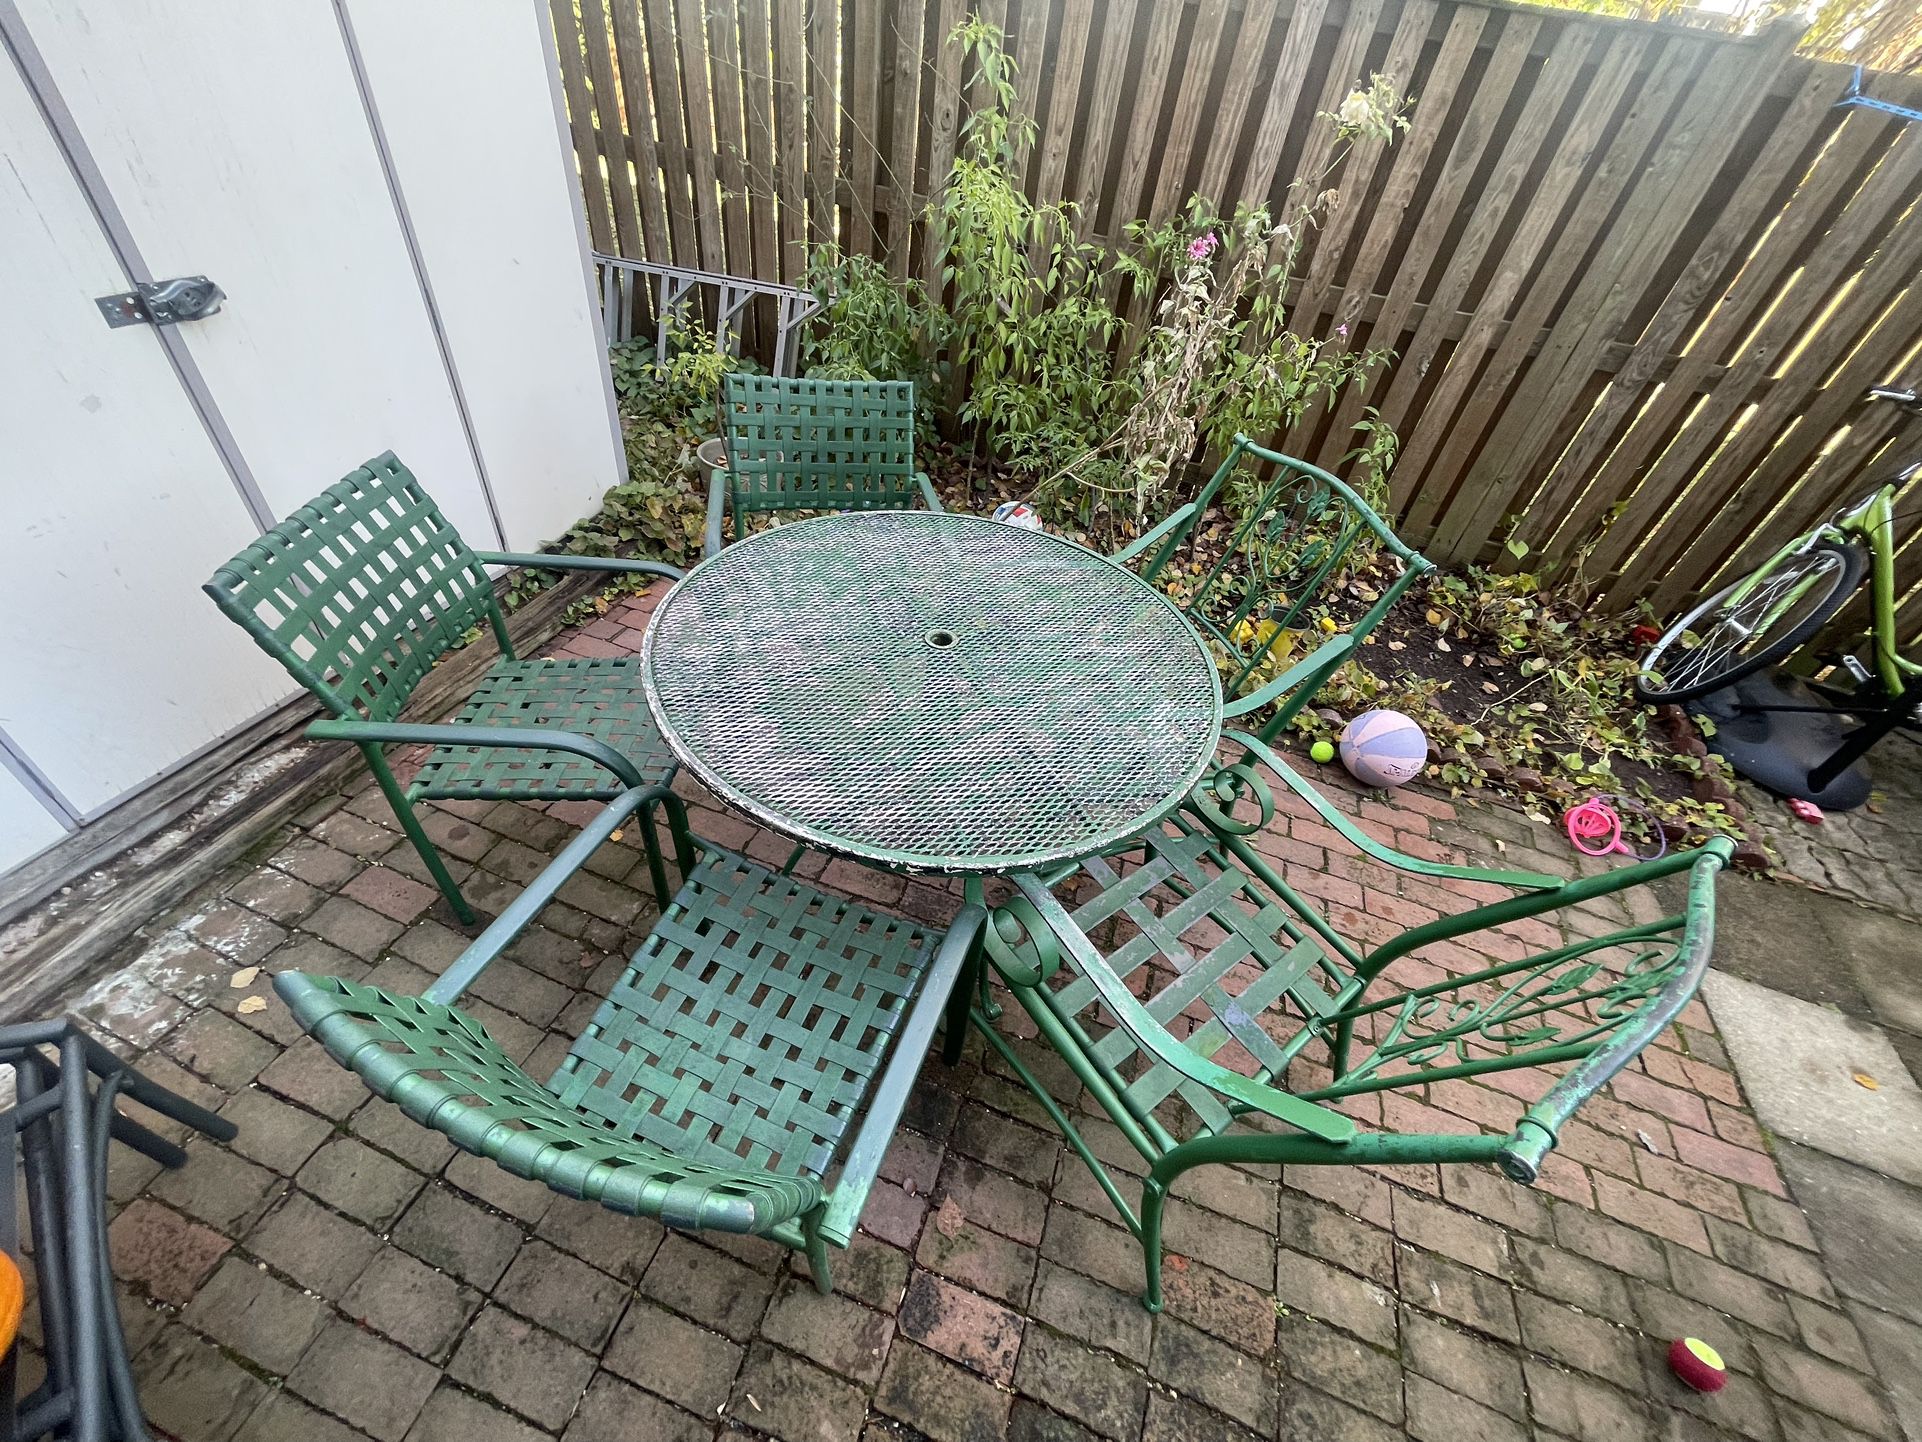 Outdoor Round Patio Table With Five Chairs